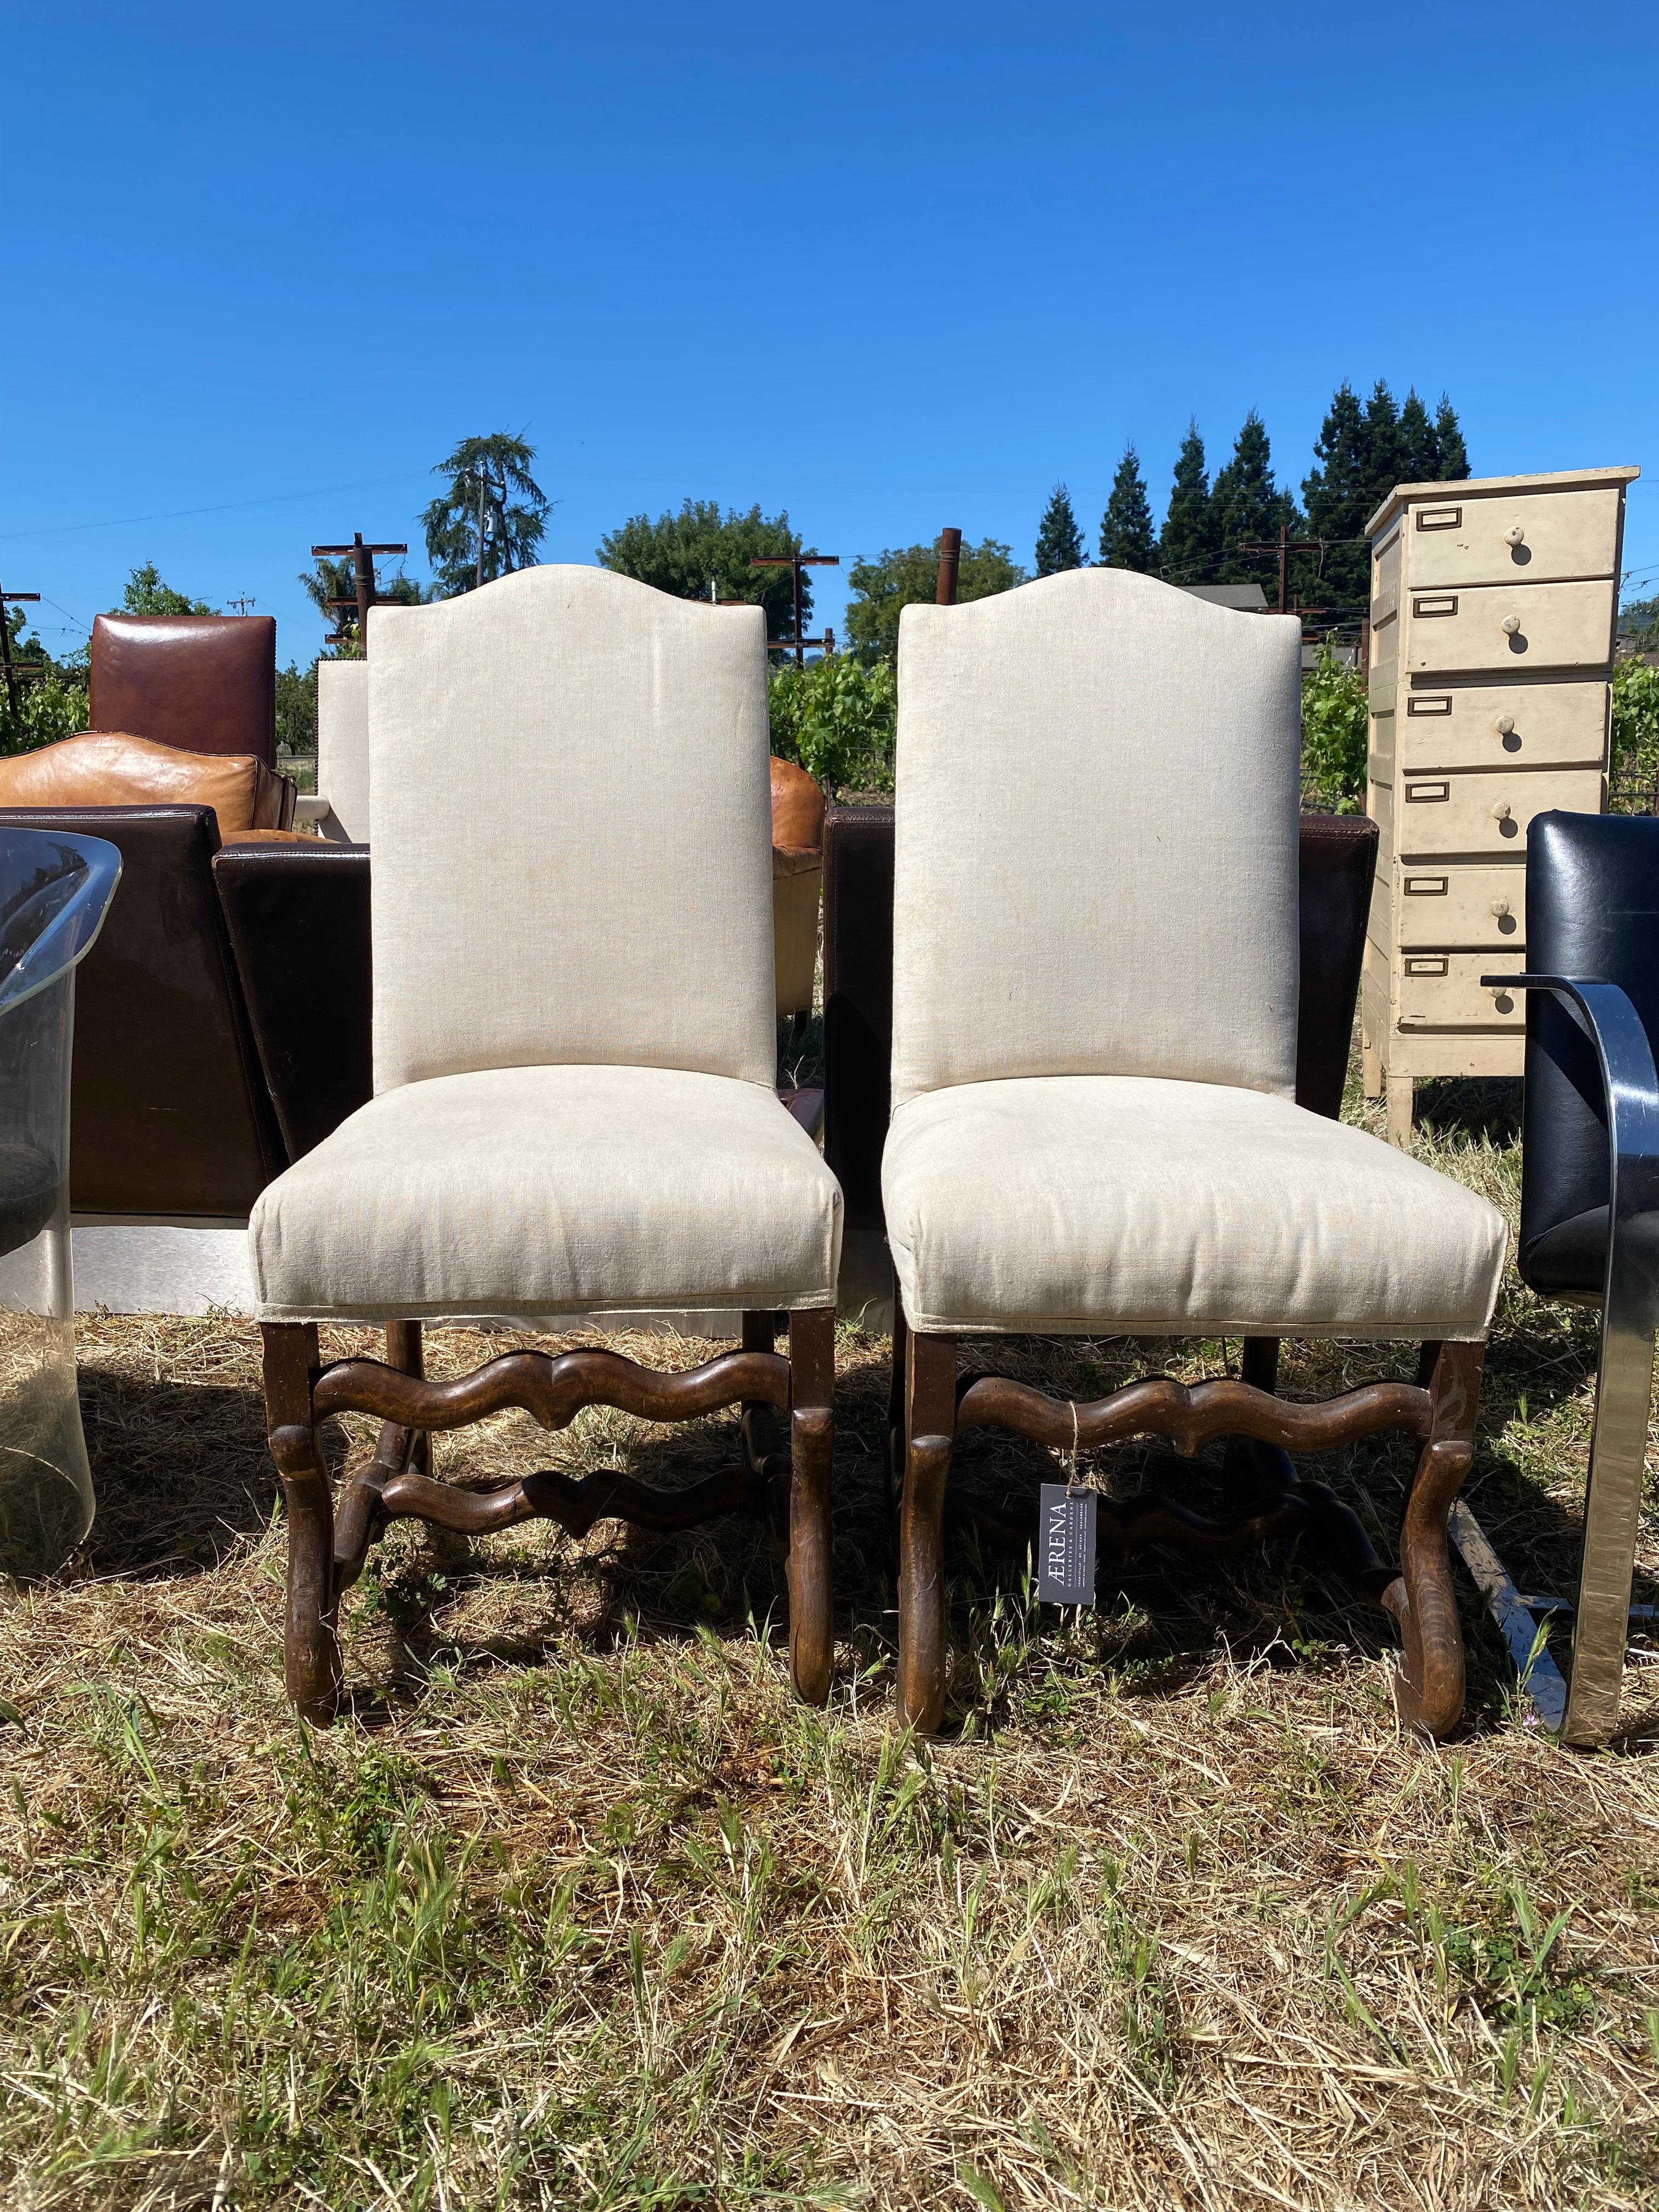 Two Louis VIII style chairs made in France in 1860 with deeply patinaed ash, upholstered in white linen.